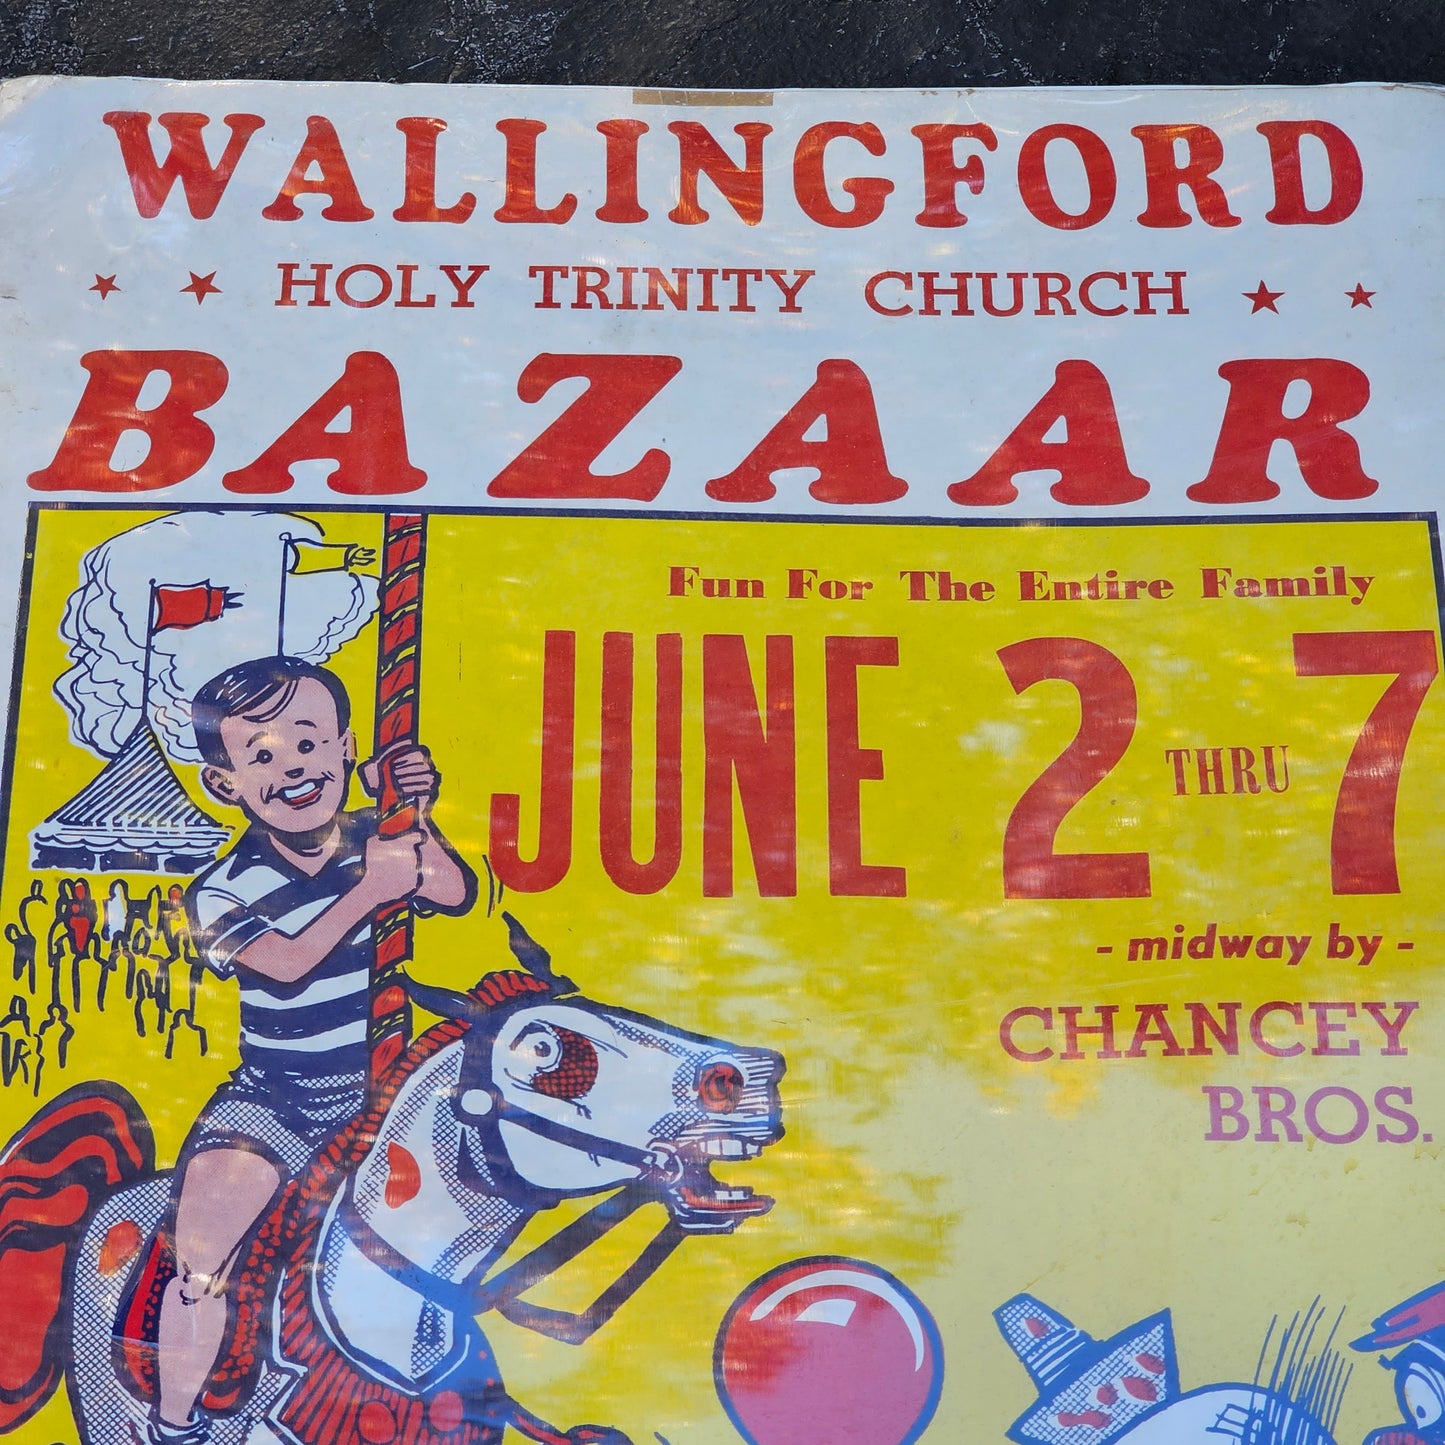 Unframed Vintage Wallingford (Delaware County) Circus Poster